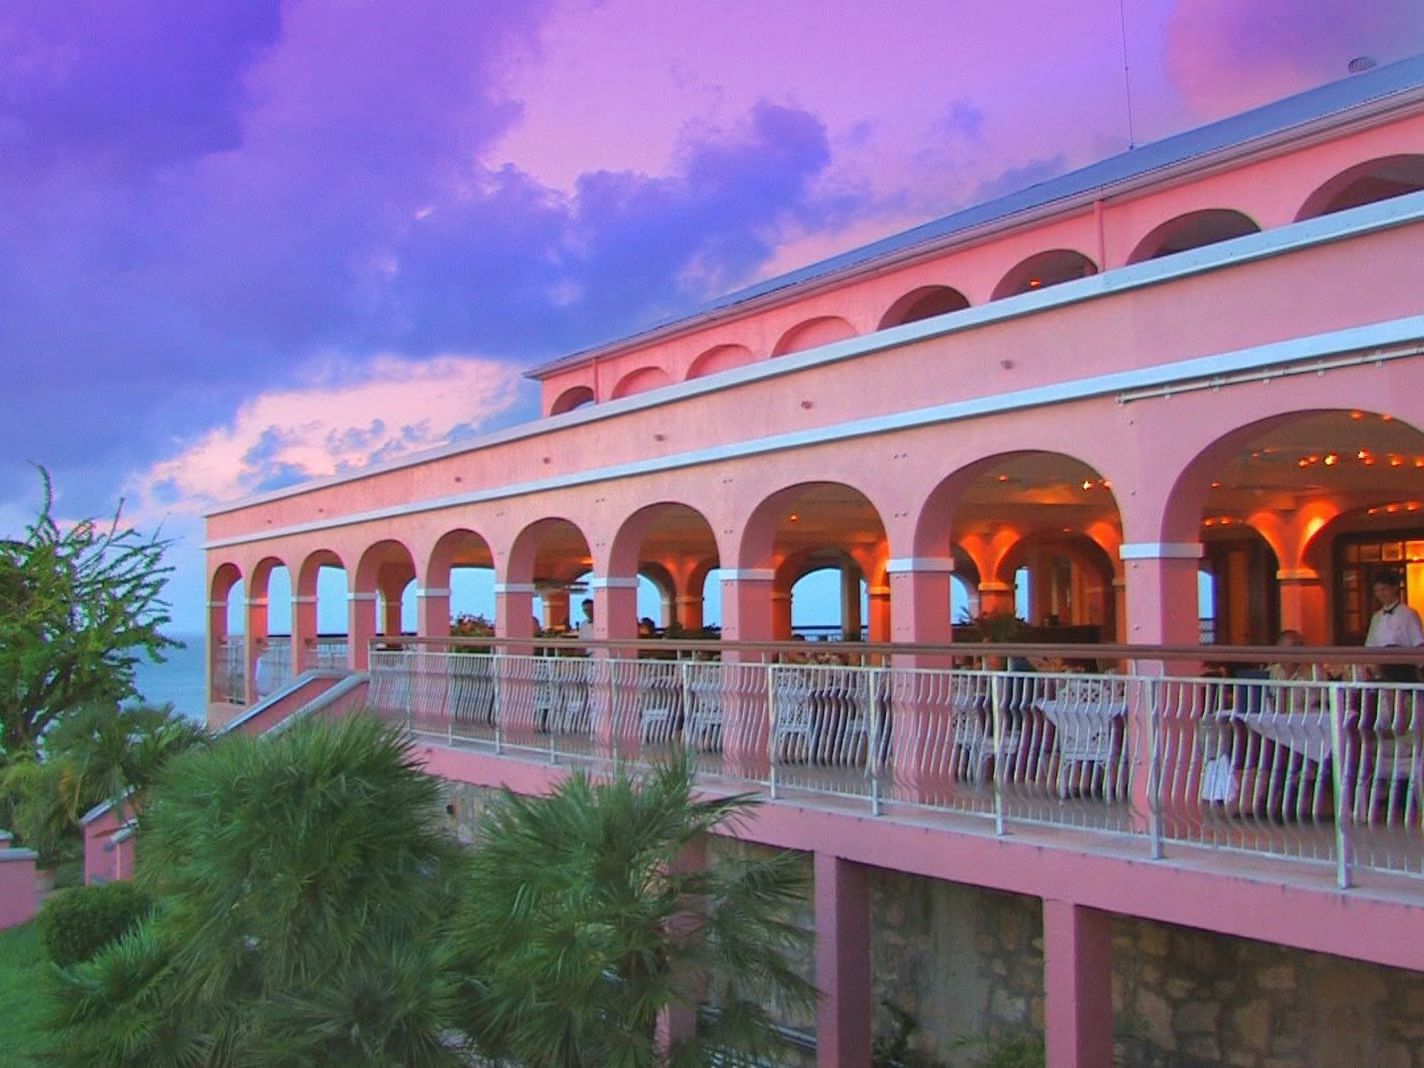 View of The Terrace restaurant in Buccaneer Hotel at sunset